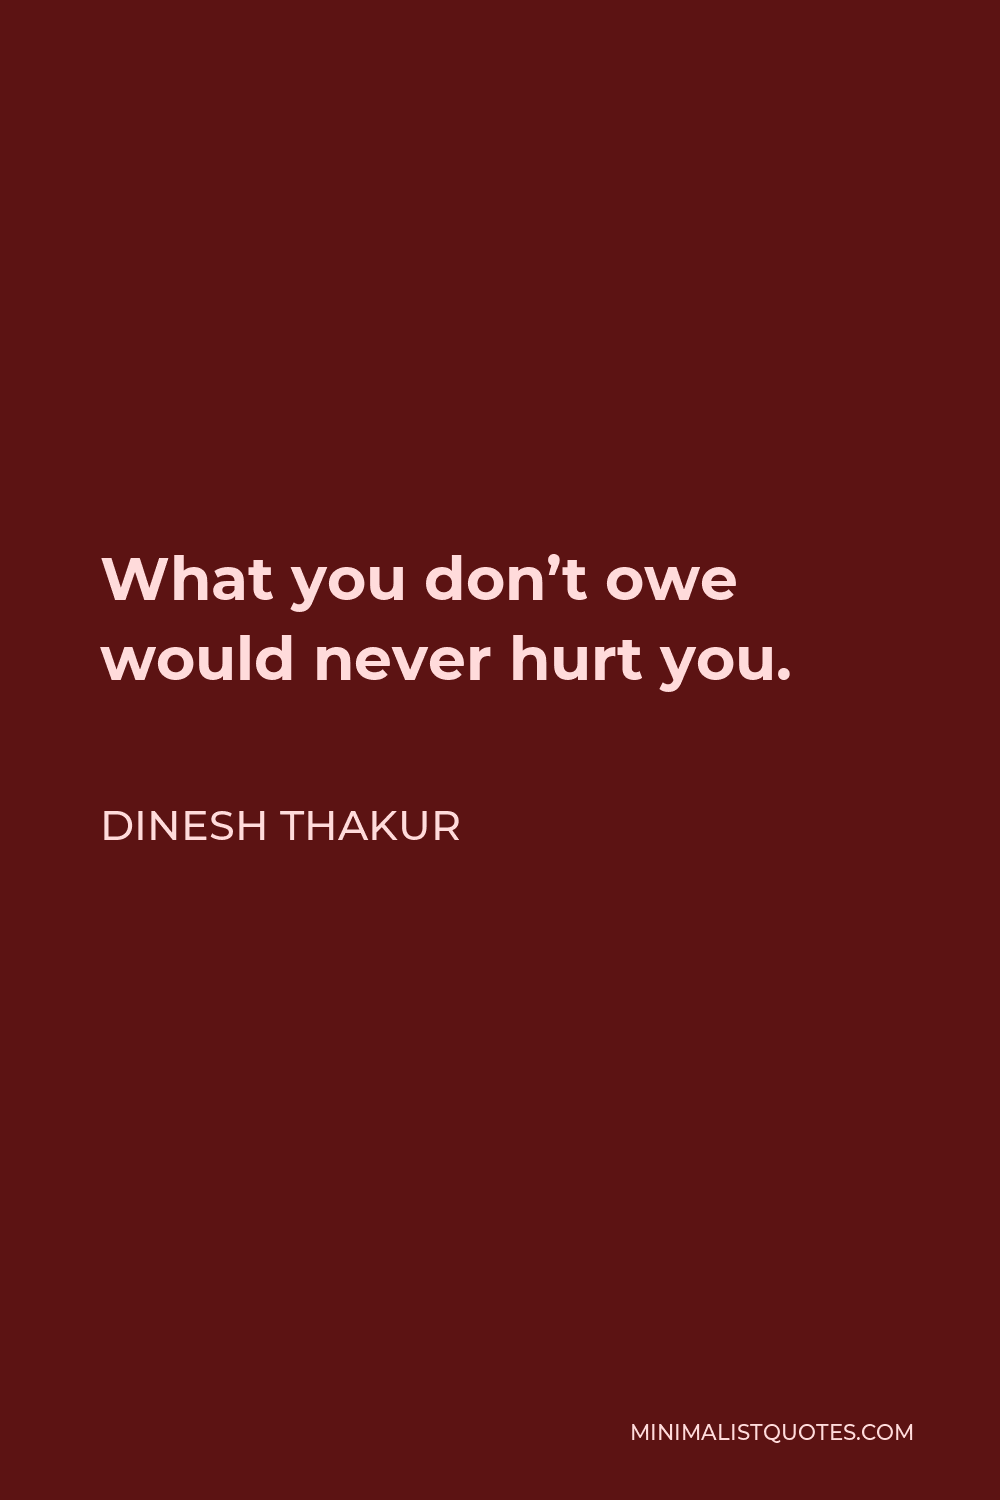 Dinesh Thakur Quote - What you don’t owe would never hurt you.